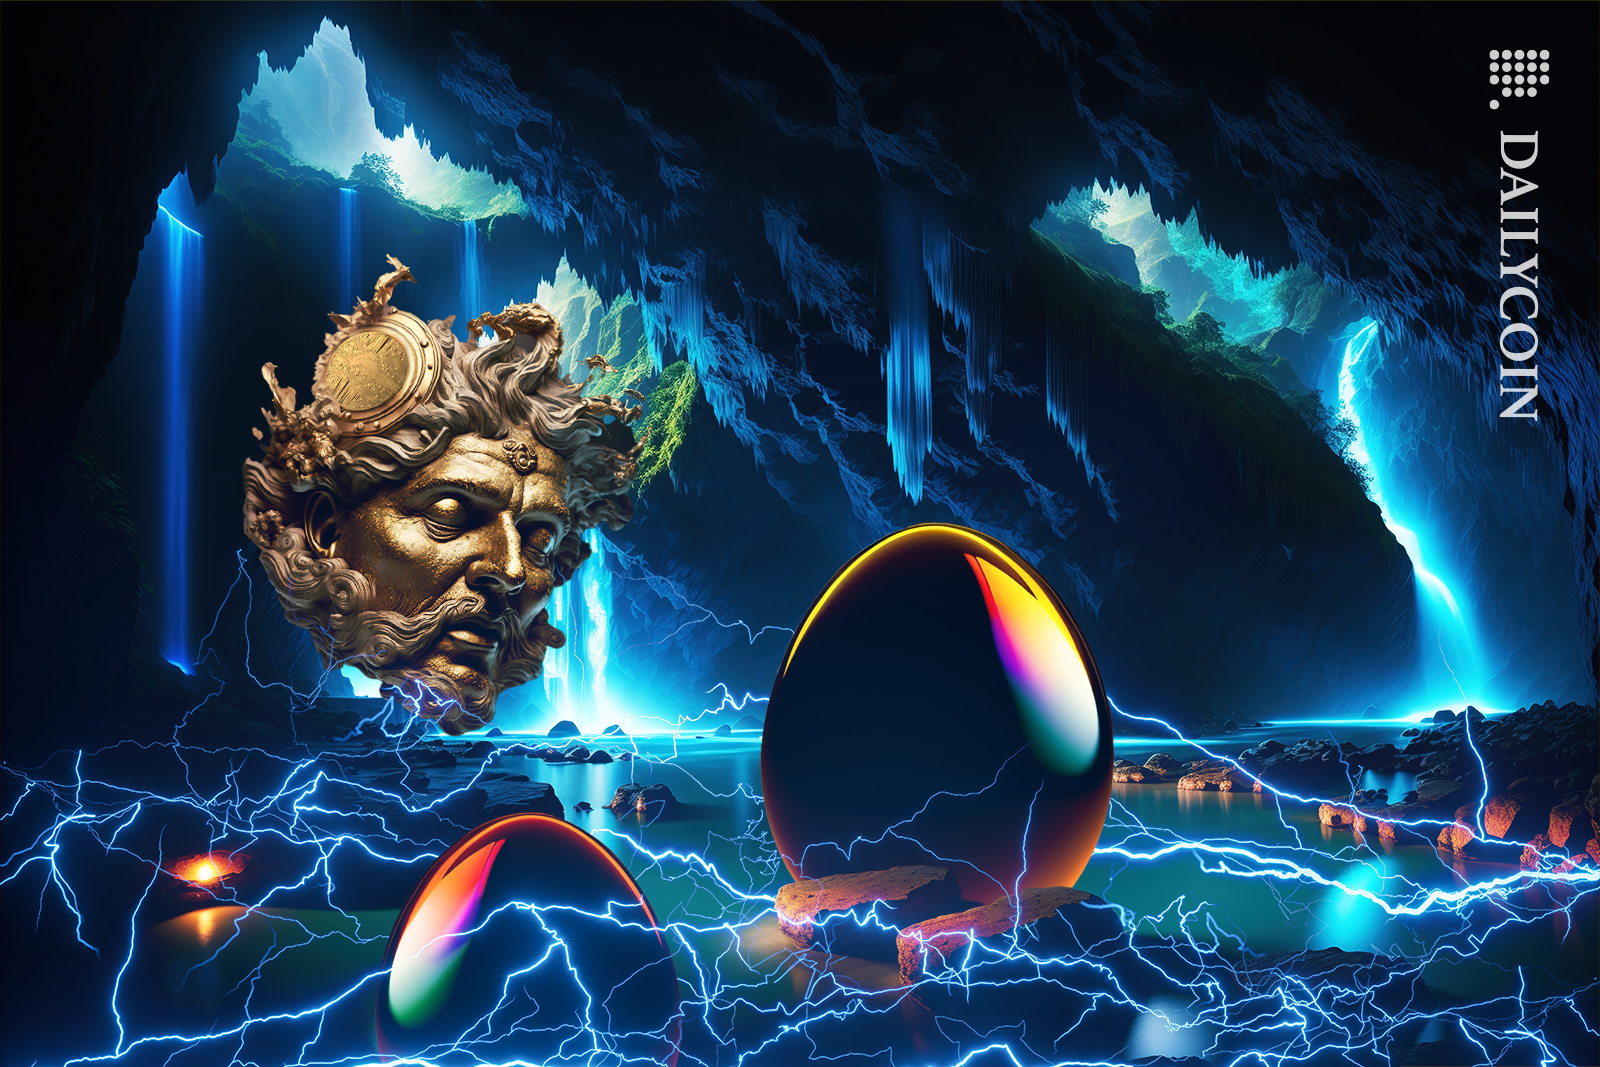 Waterfall cave with glossy eggs in the water surrounded by electricity. Greek head with a crypto coin is watching them.